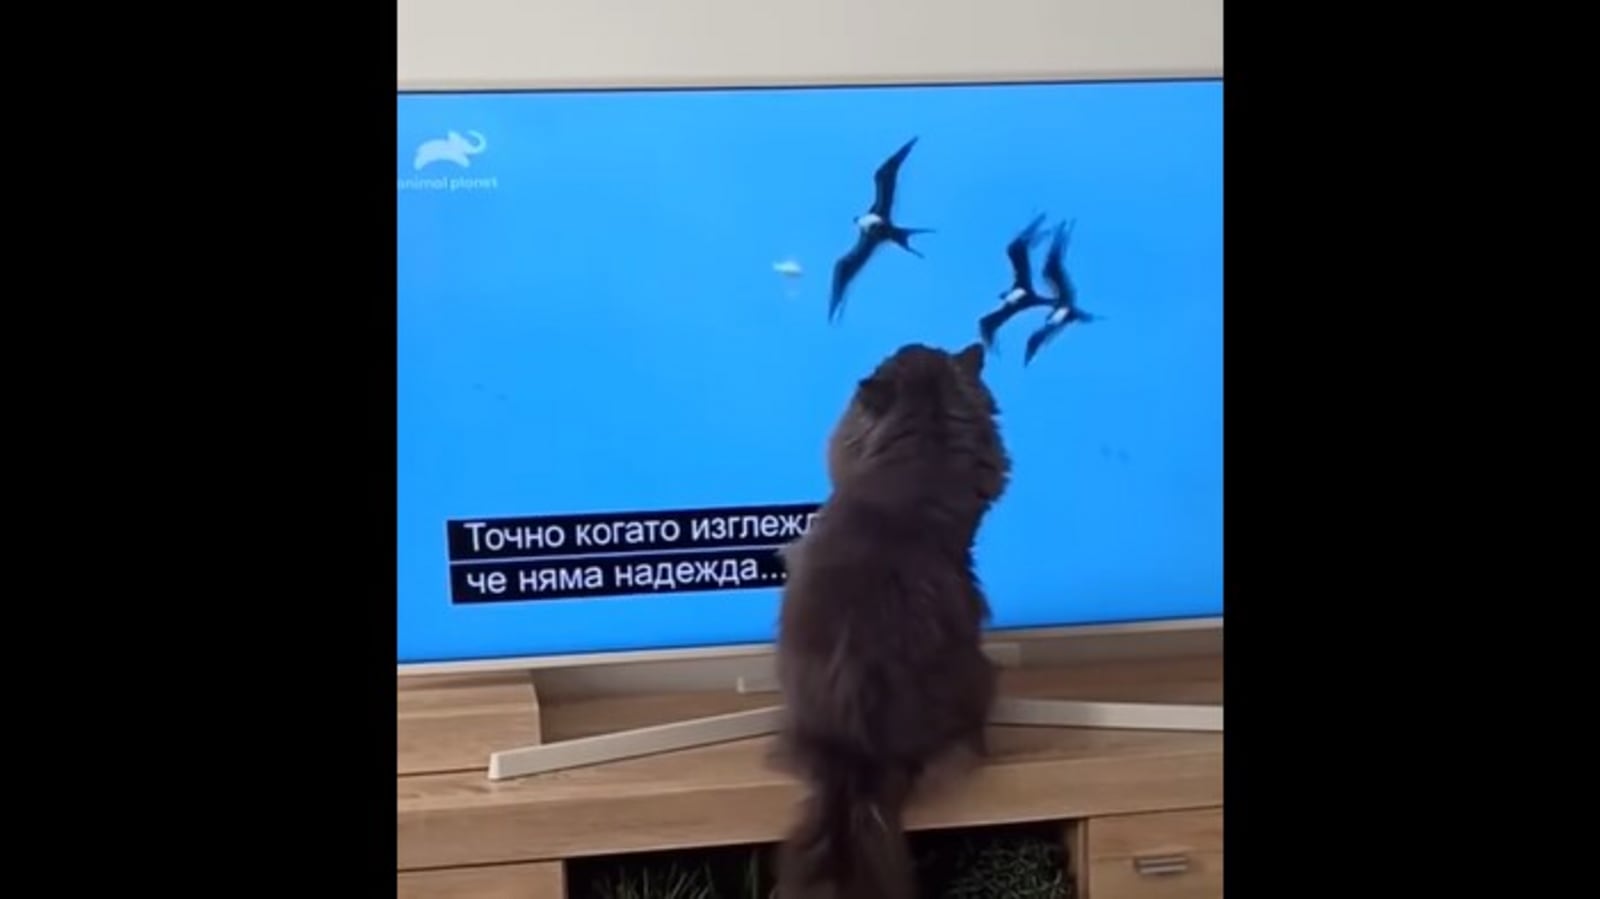 Surprised catto ‘catches’ birds on the television. Watch cute video